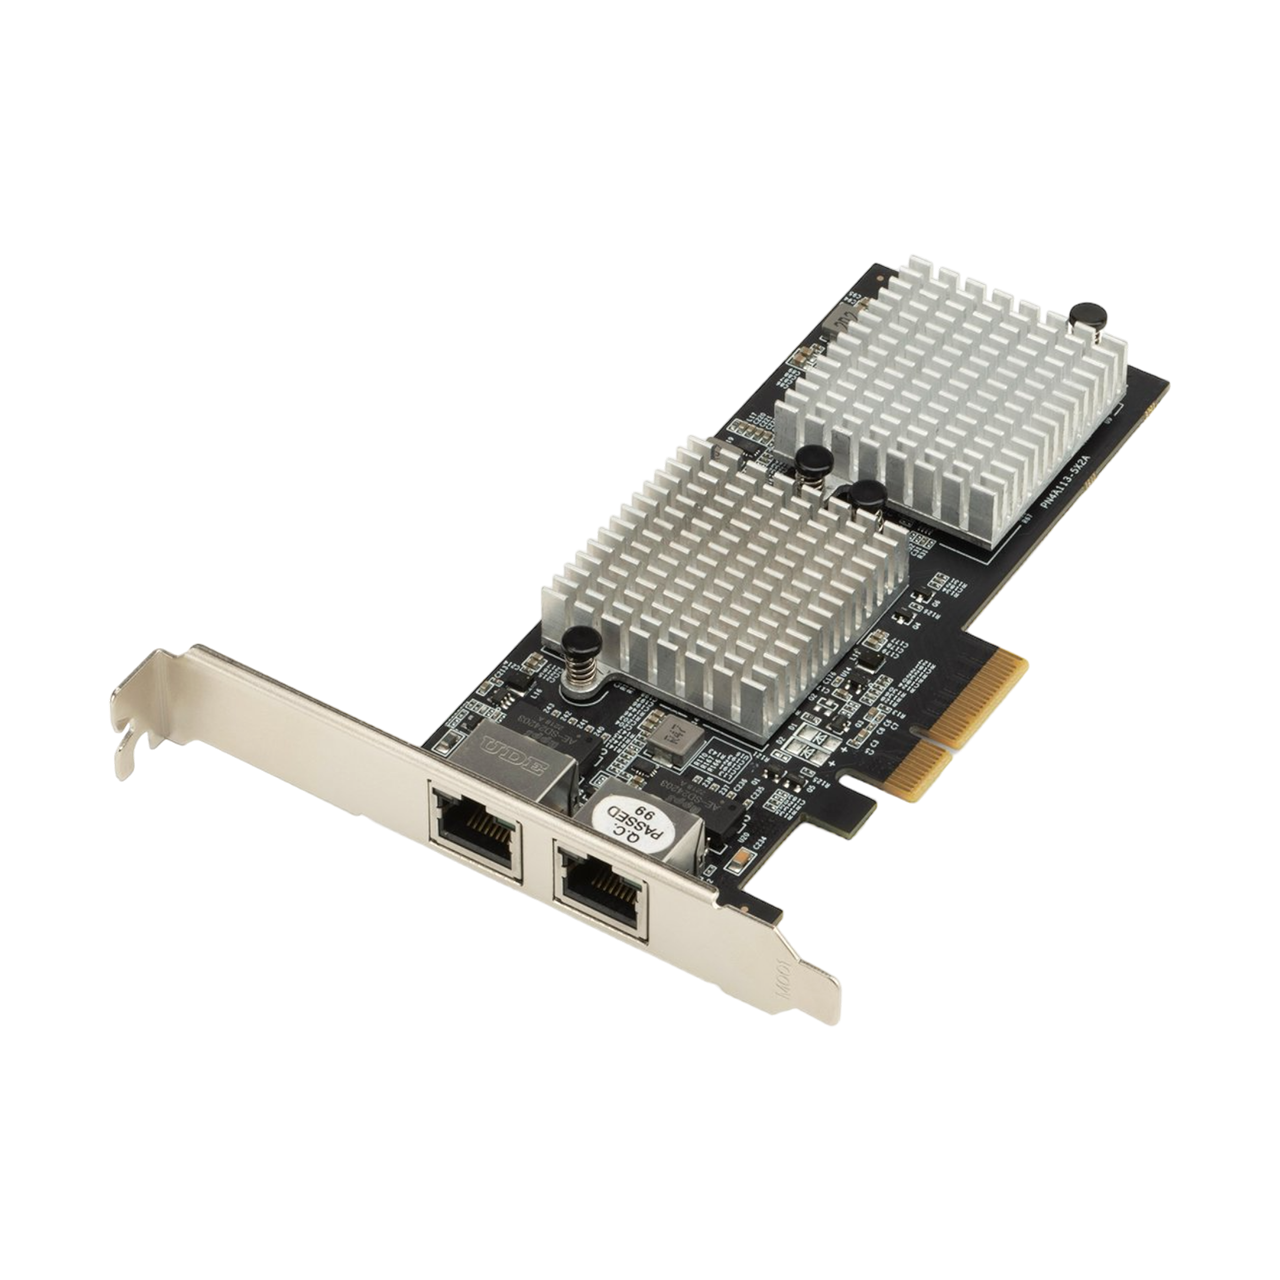 OWC 2-Port 10G Ethernet PCIe Network Adapter Expansion Card